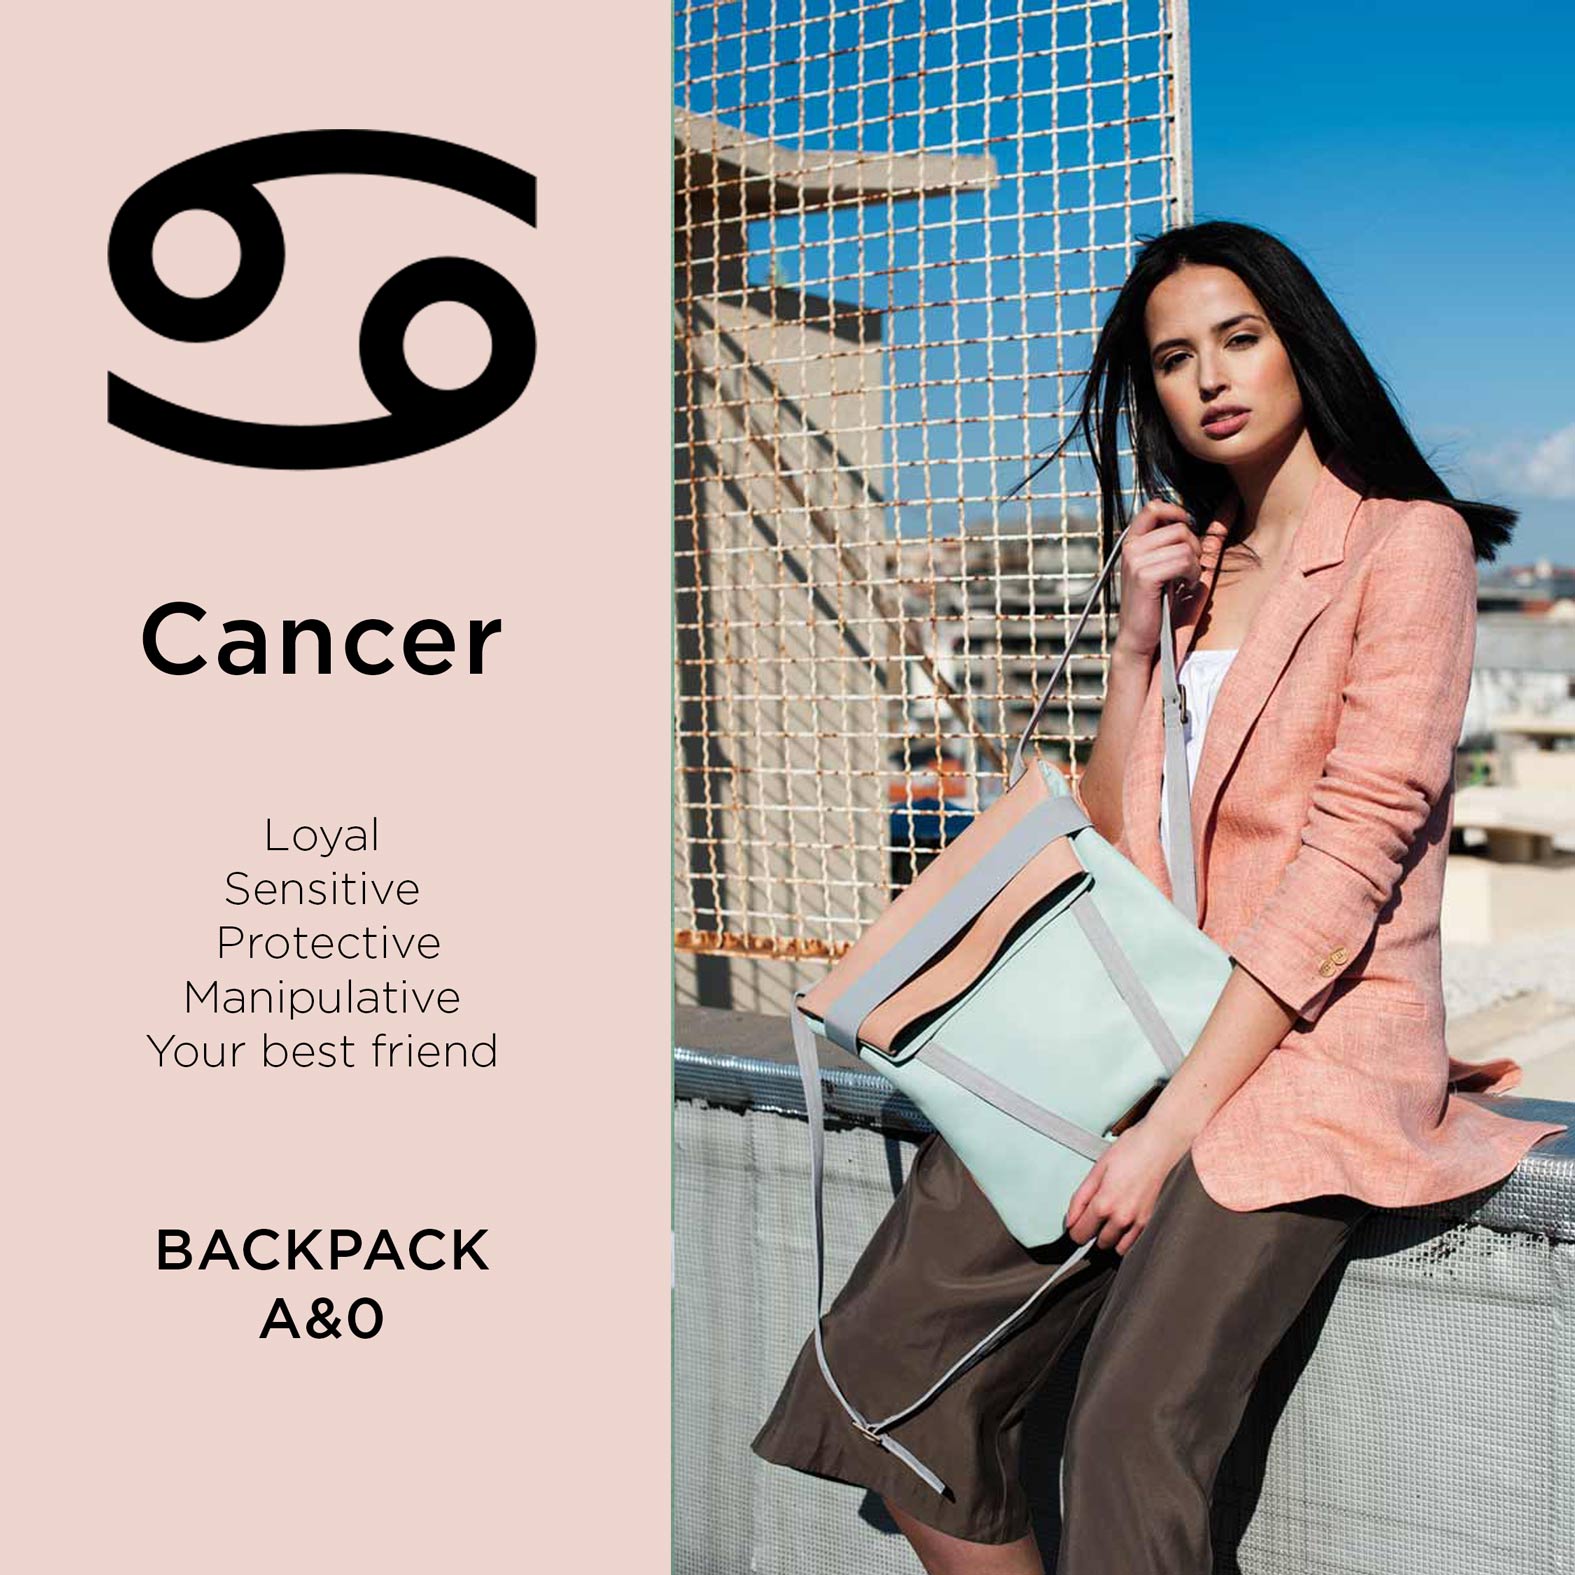 The perfect bag for the cancer Woman